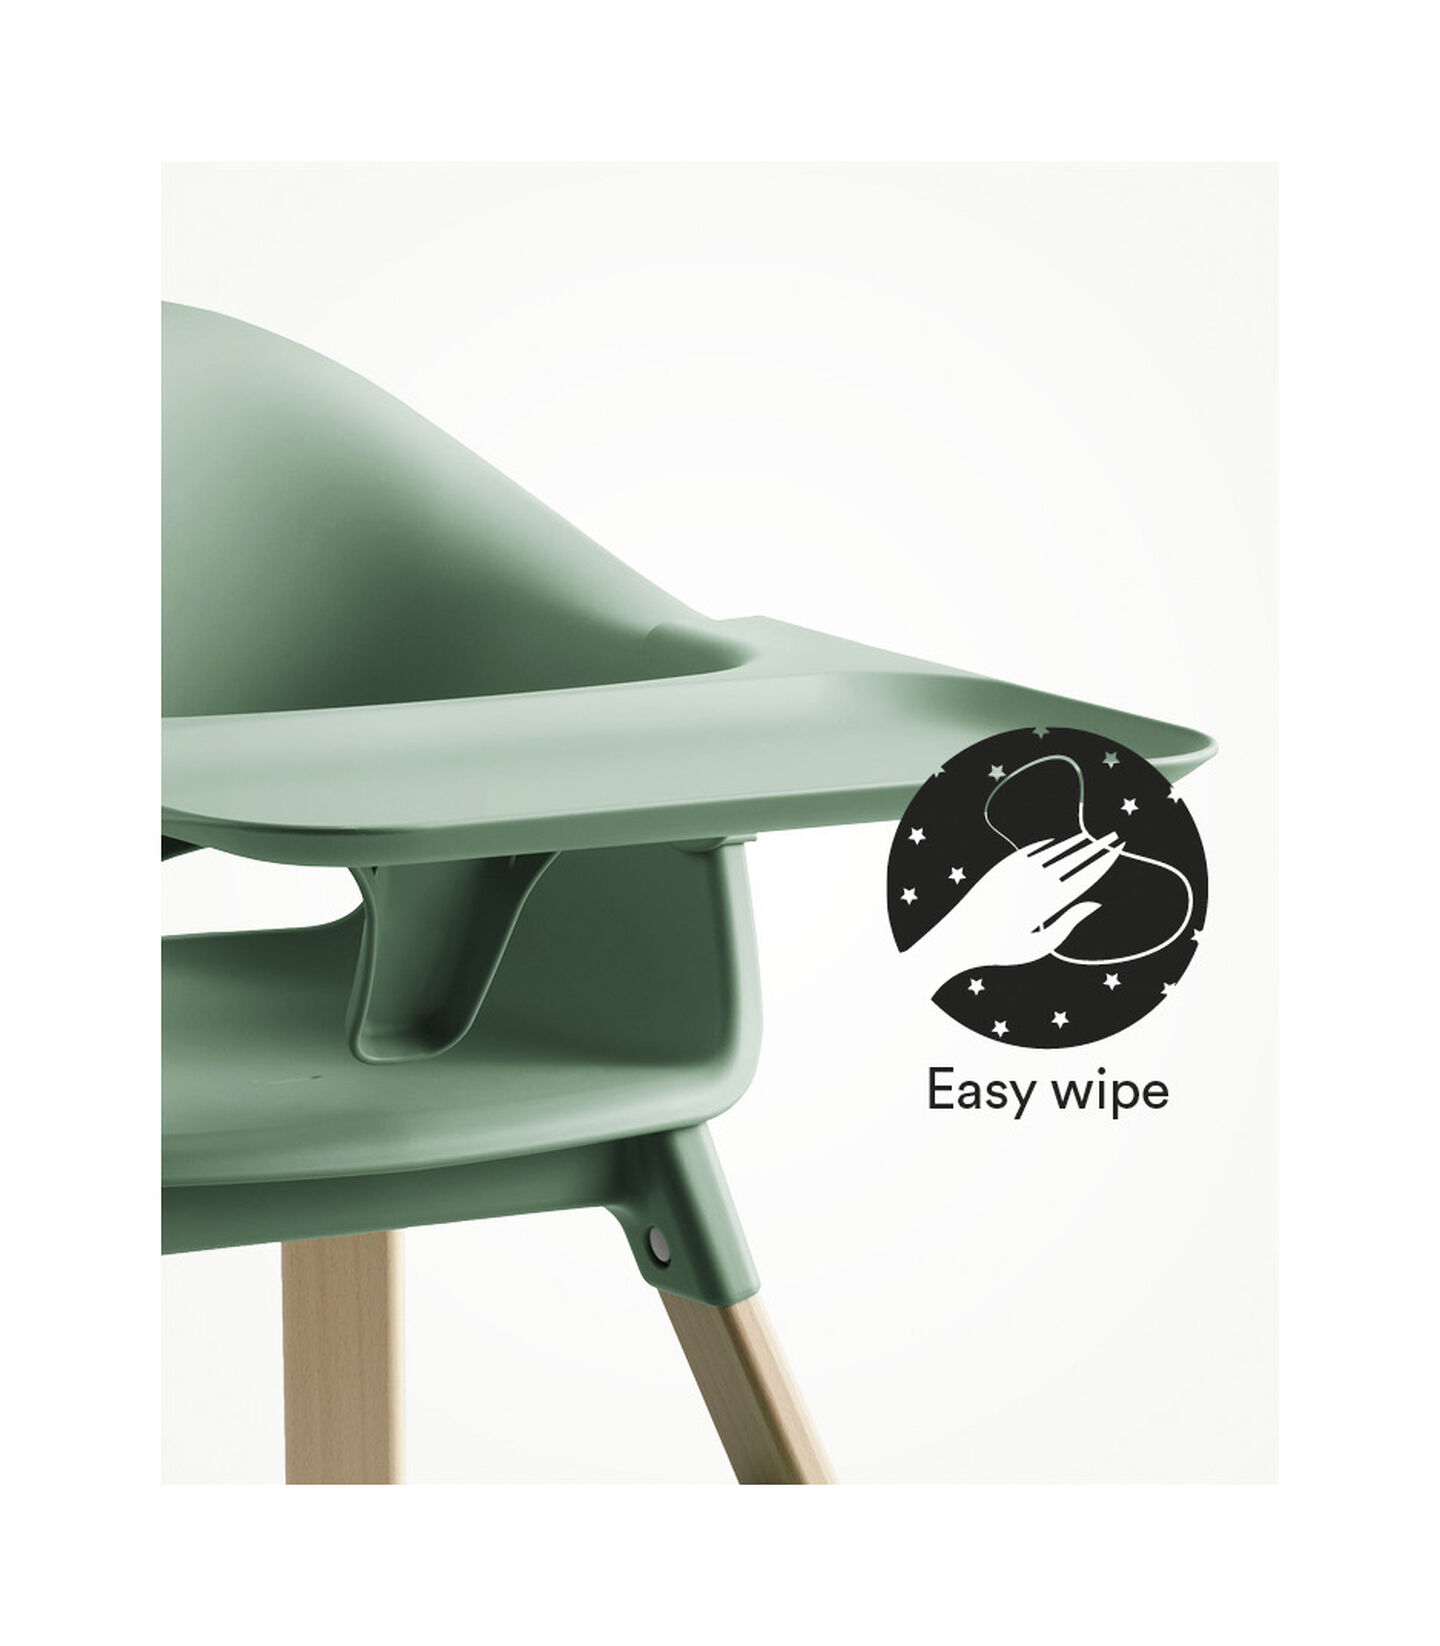 Stokke® Clikk™ High Chair with Tray, in Natural and Clover Green. Easy Wipe. view 4